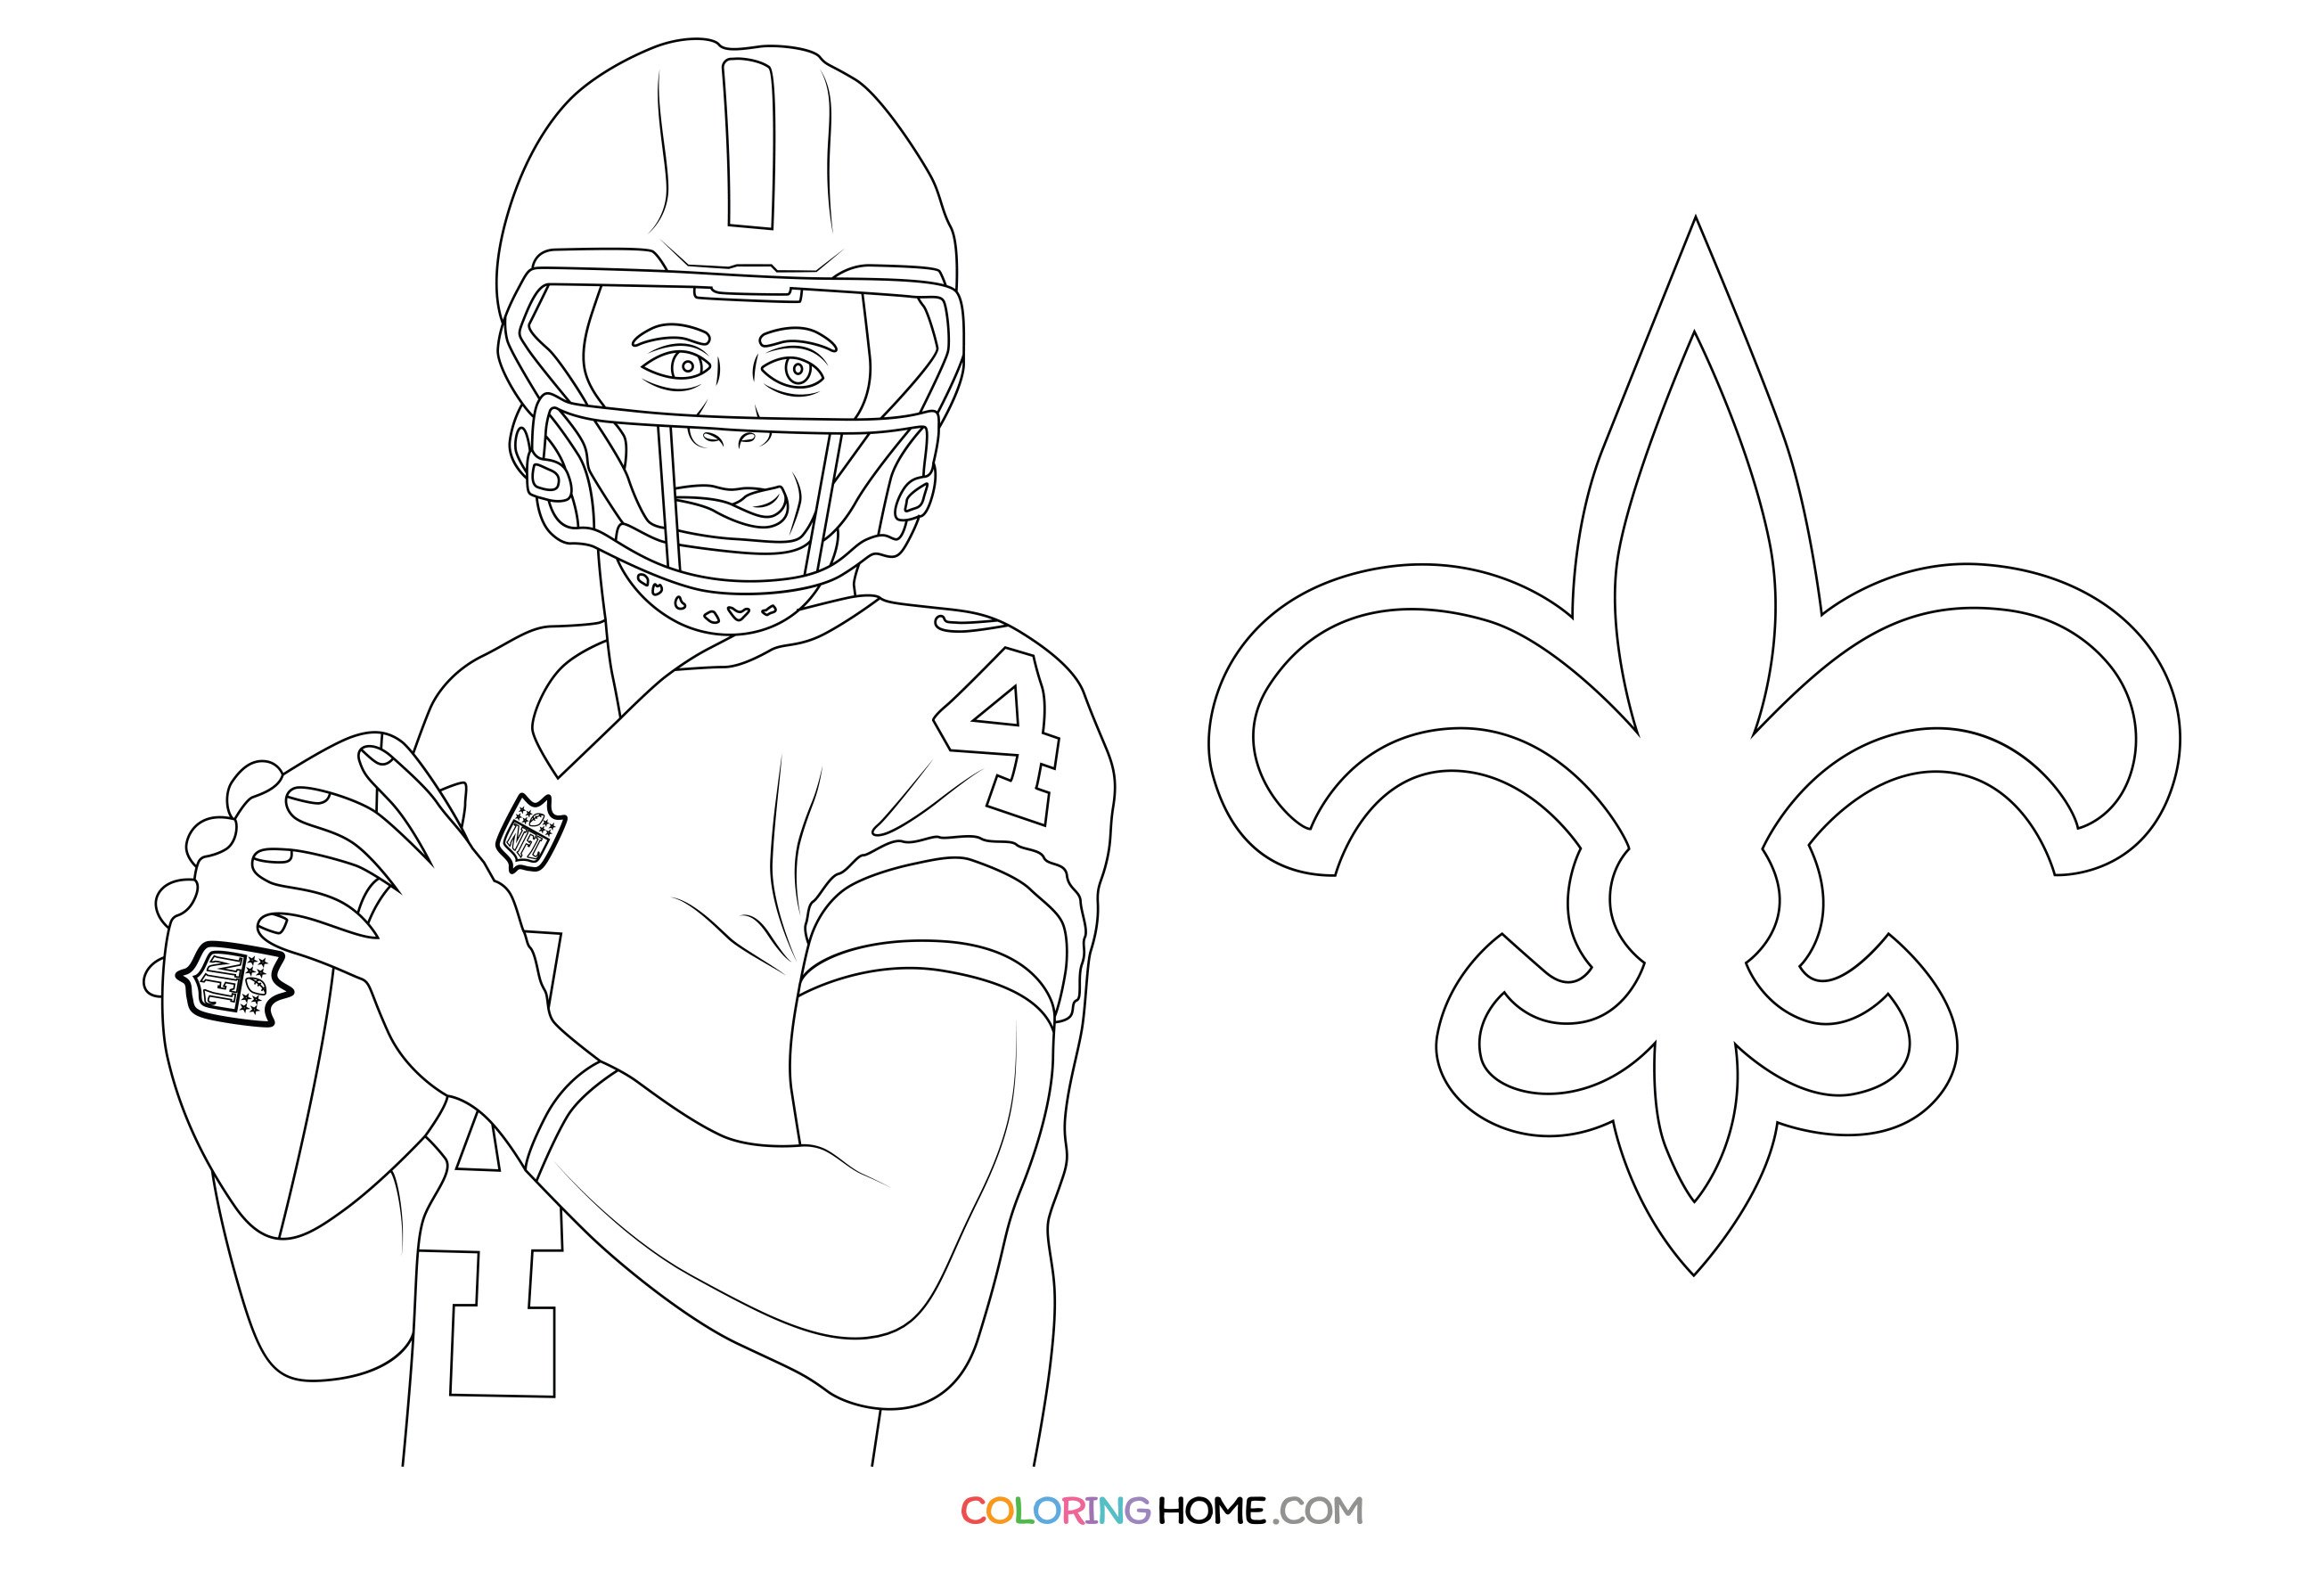 Derek Carr Coloring Page - Coloring Home